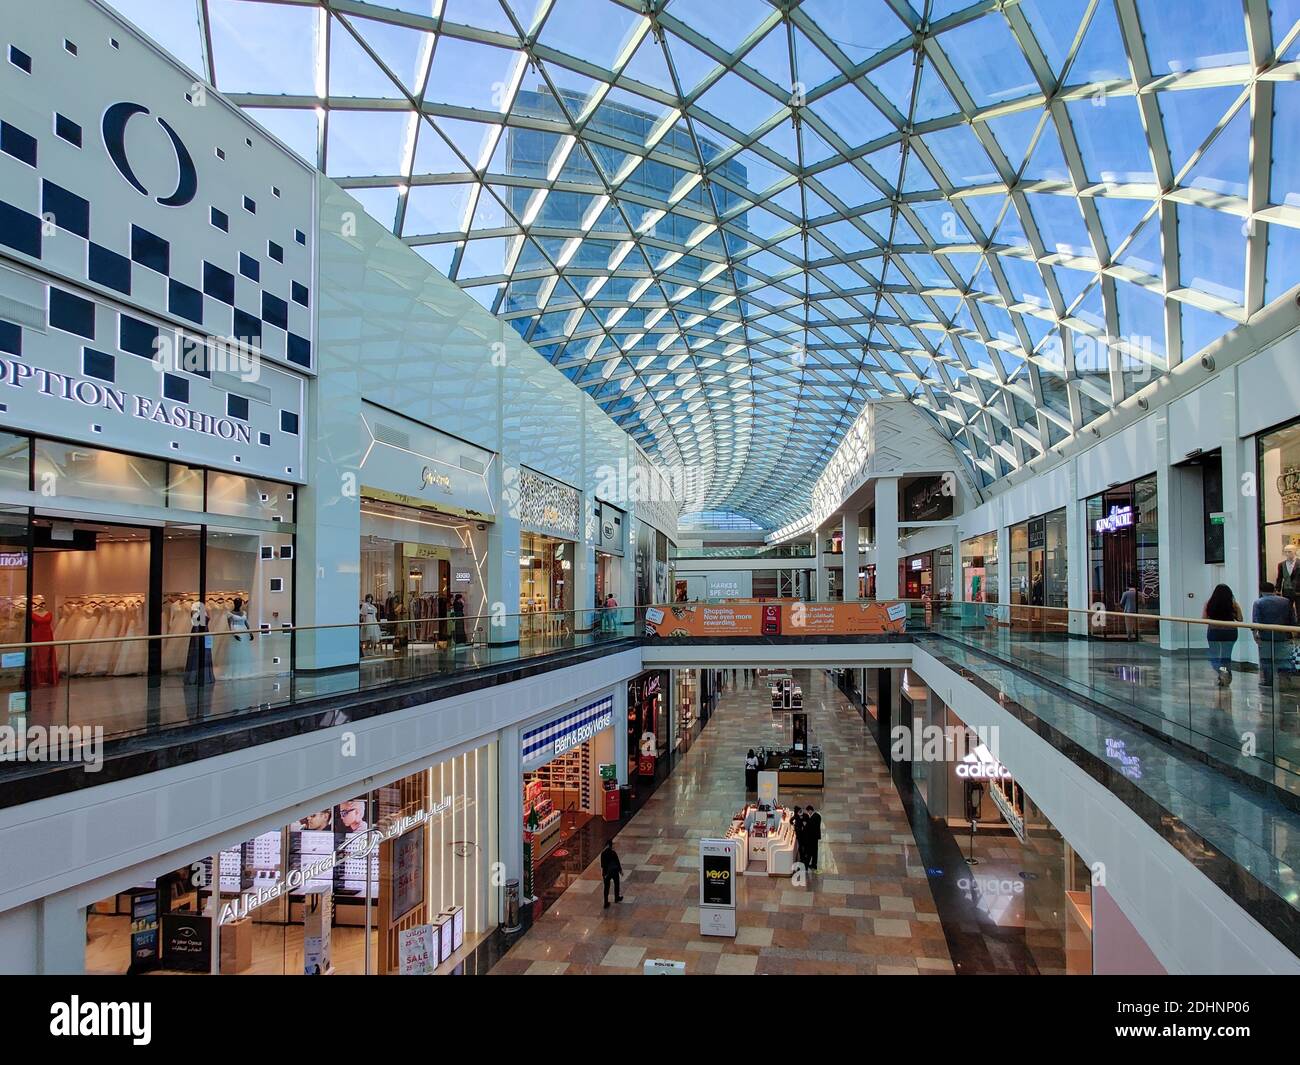 Shopping Mall modern interior design | Dubai festival city mall, an iconic  shopping mall in the United Arab Emirates | Tourist attractions Stock Photo  - Alamy